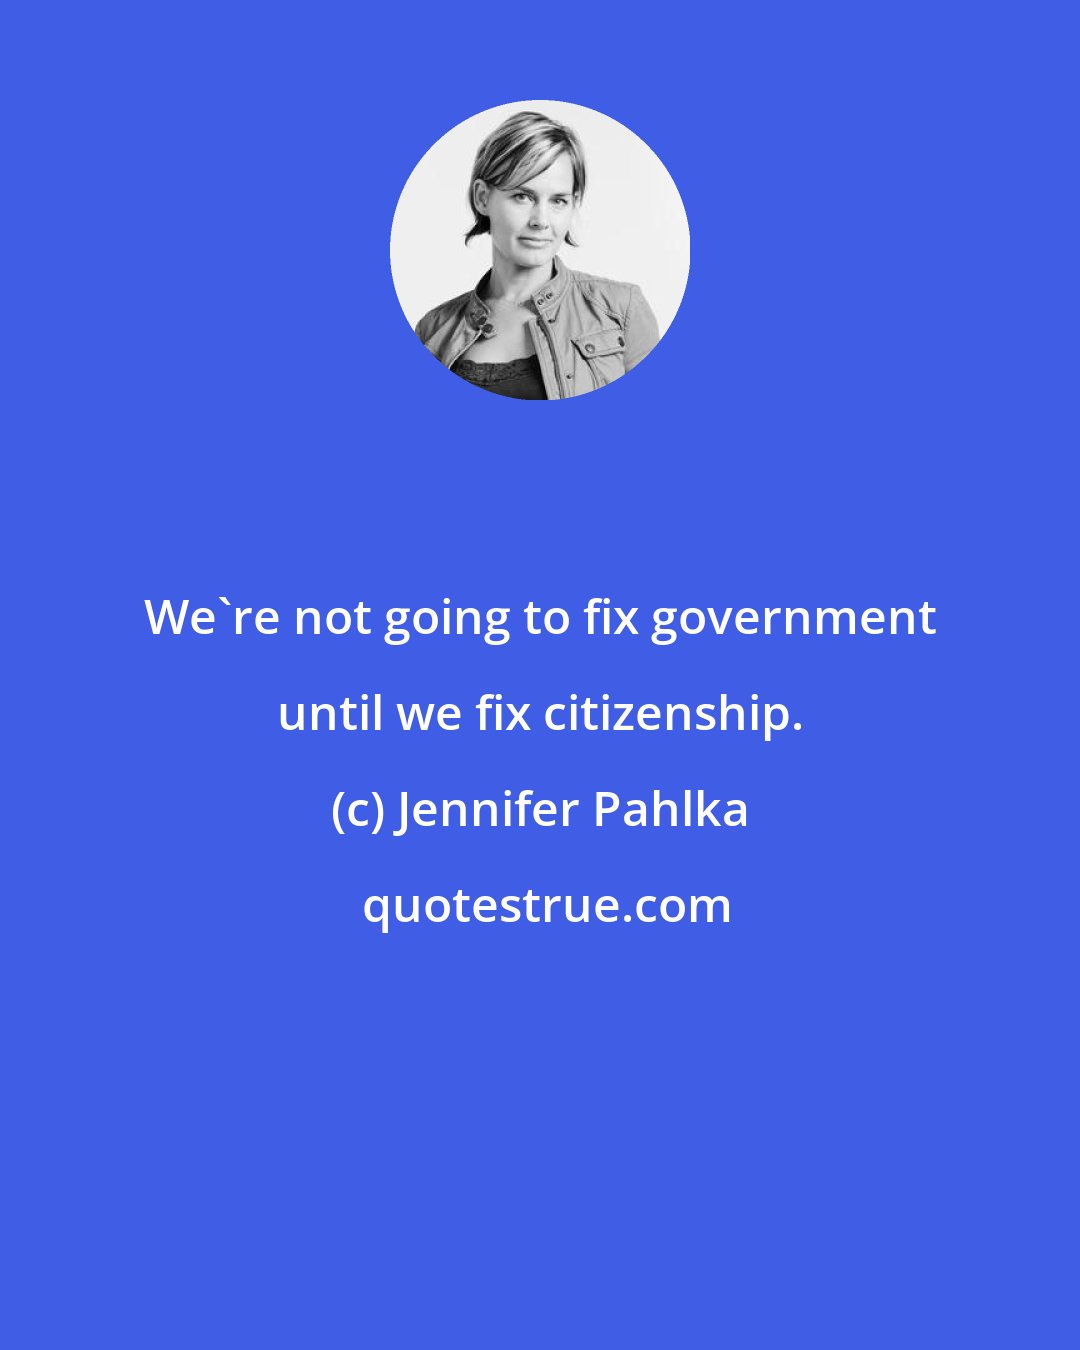 Jennifer Pahlka: We're not going to fix government until we fix citizenship.